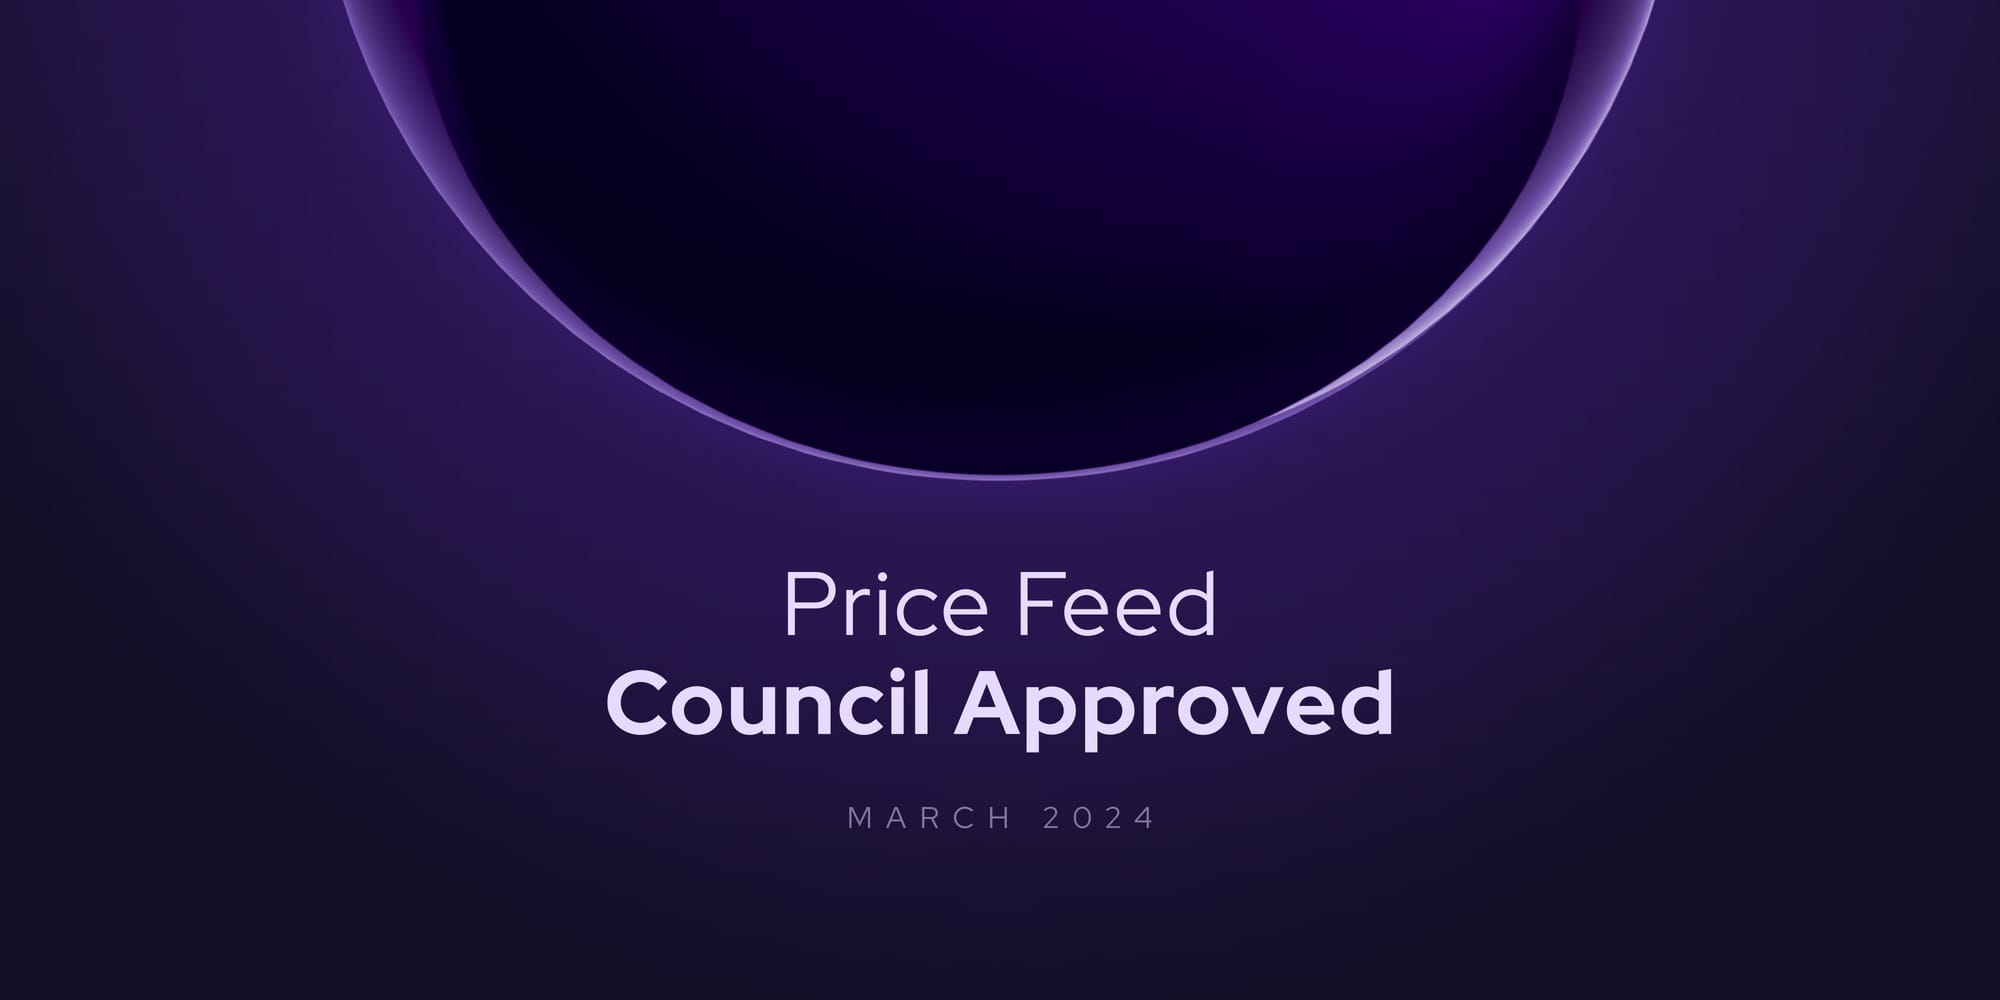 The Launch of the Inaugural Price Feed Council | March 2024